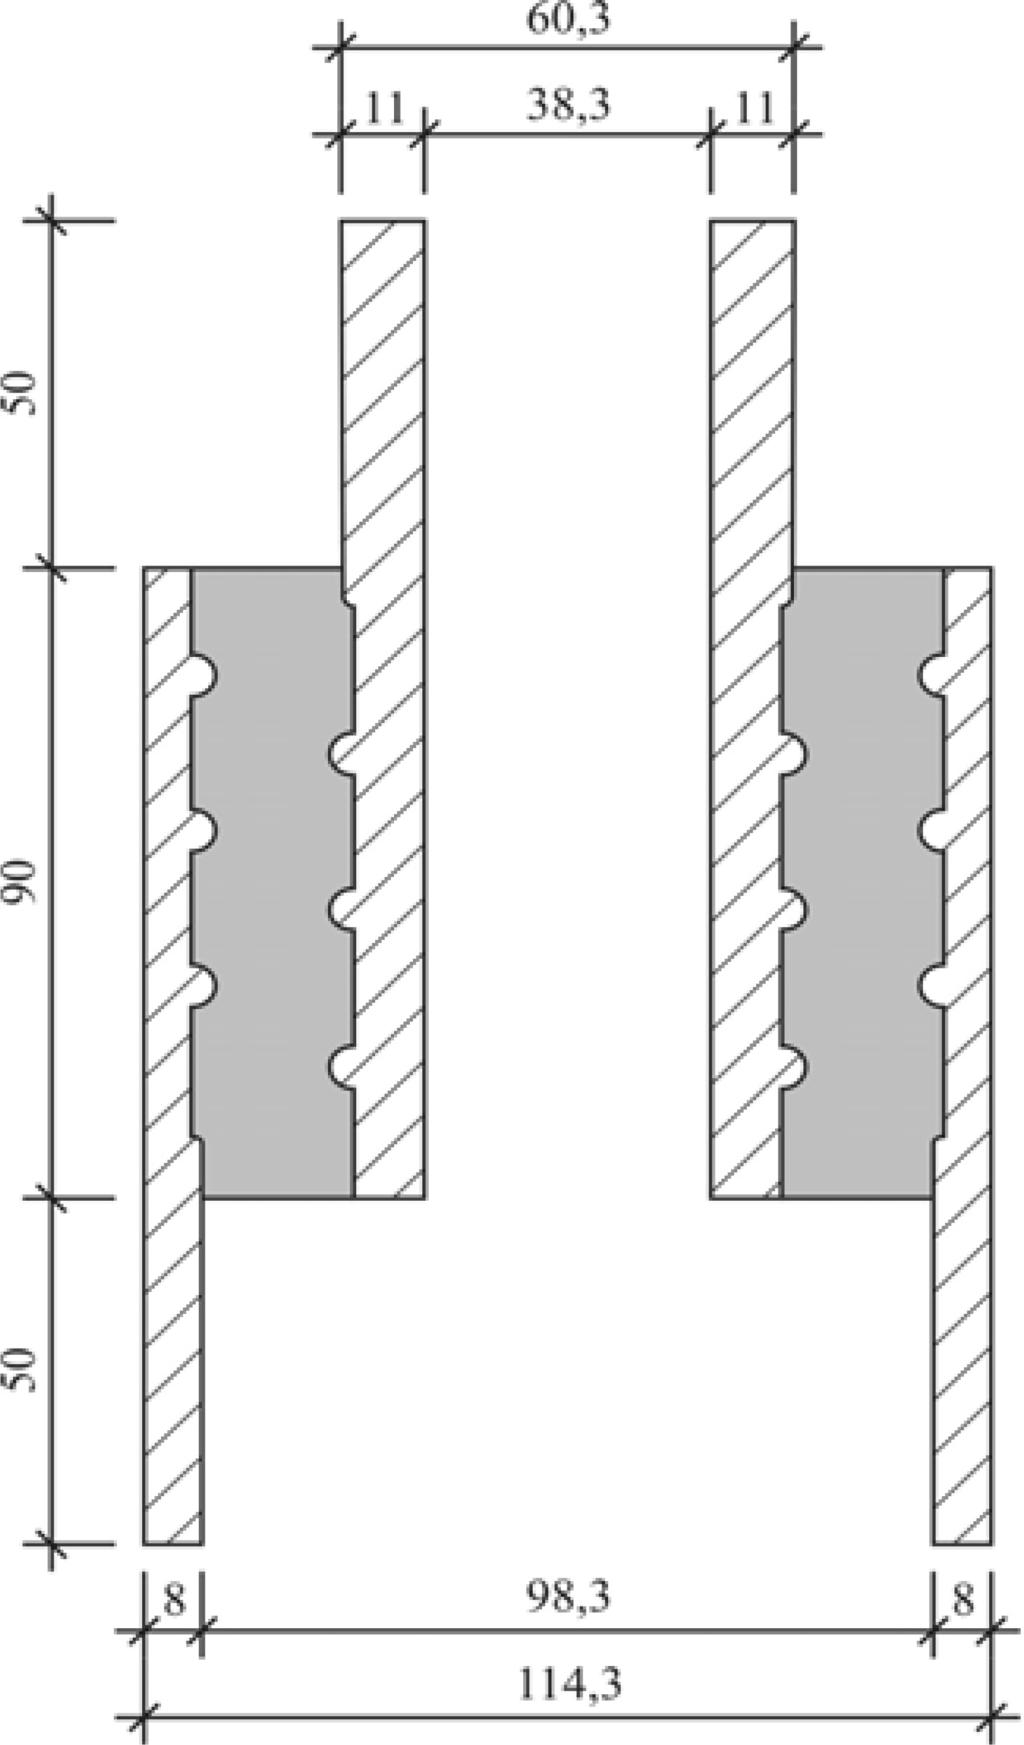 of the grout and the ratio of height to spacing (h/s) of the shear keys. Some recommendations limit the h/s-ratio to 0.1. H/s-ratios exceeding 0.